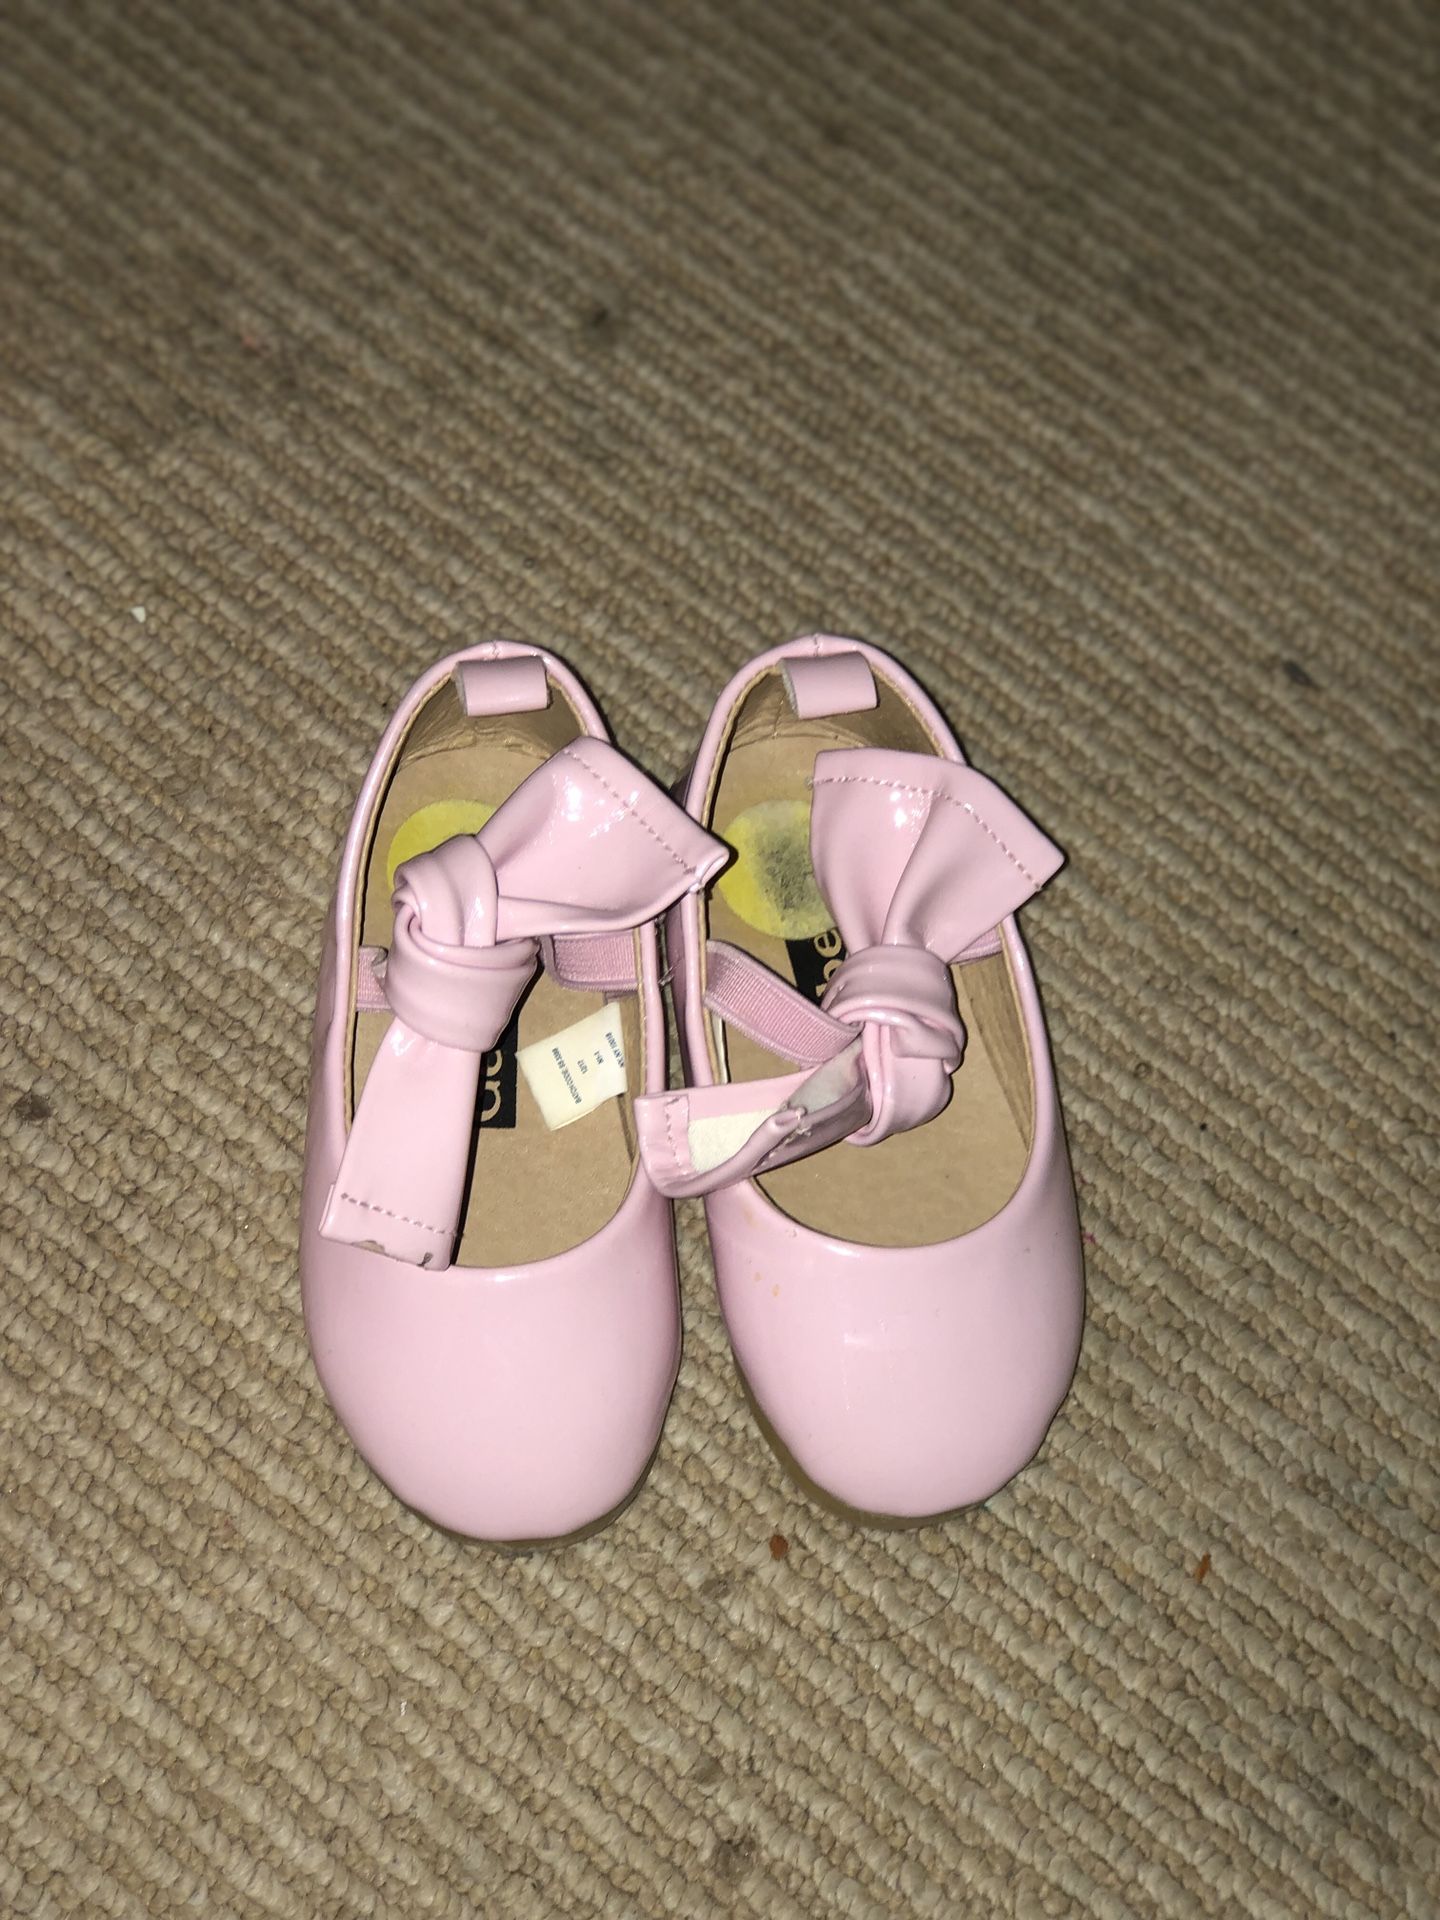 Baby girl pink patent dress shoes